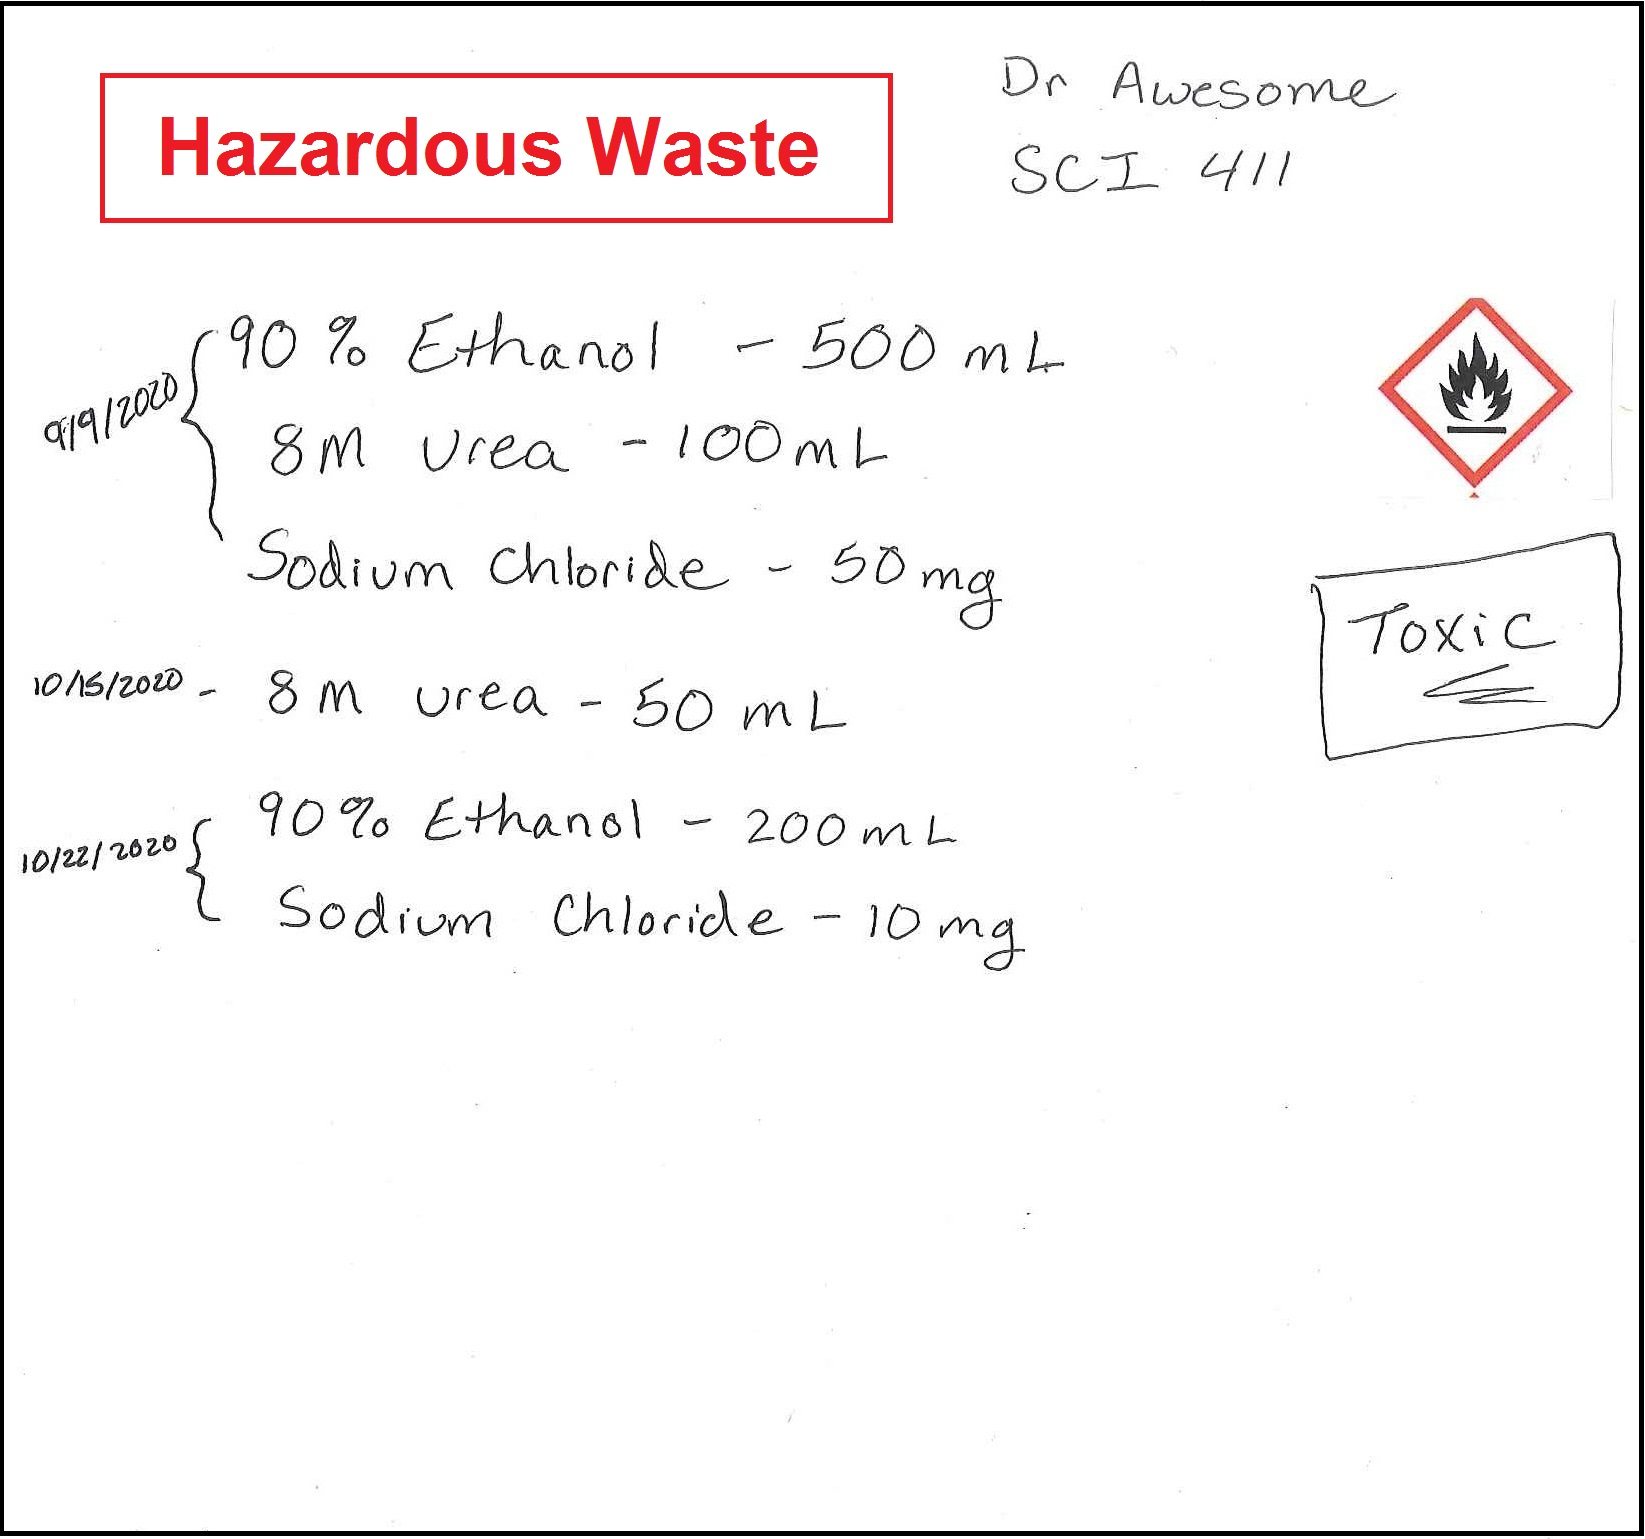 Example waste label for a container that is still being filled.